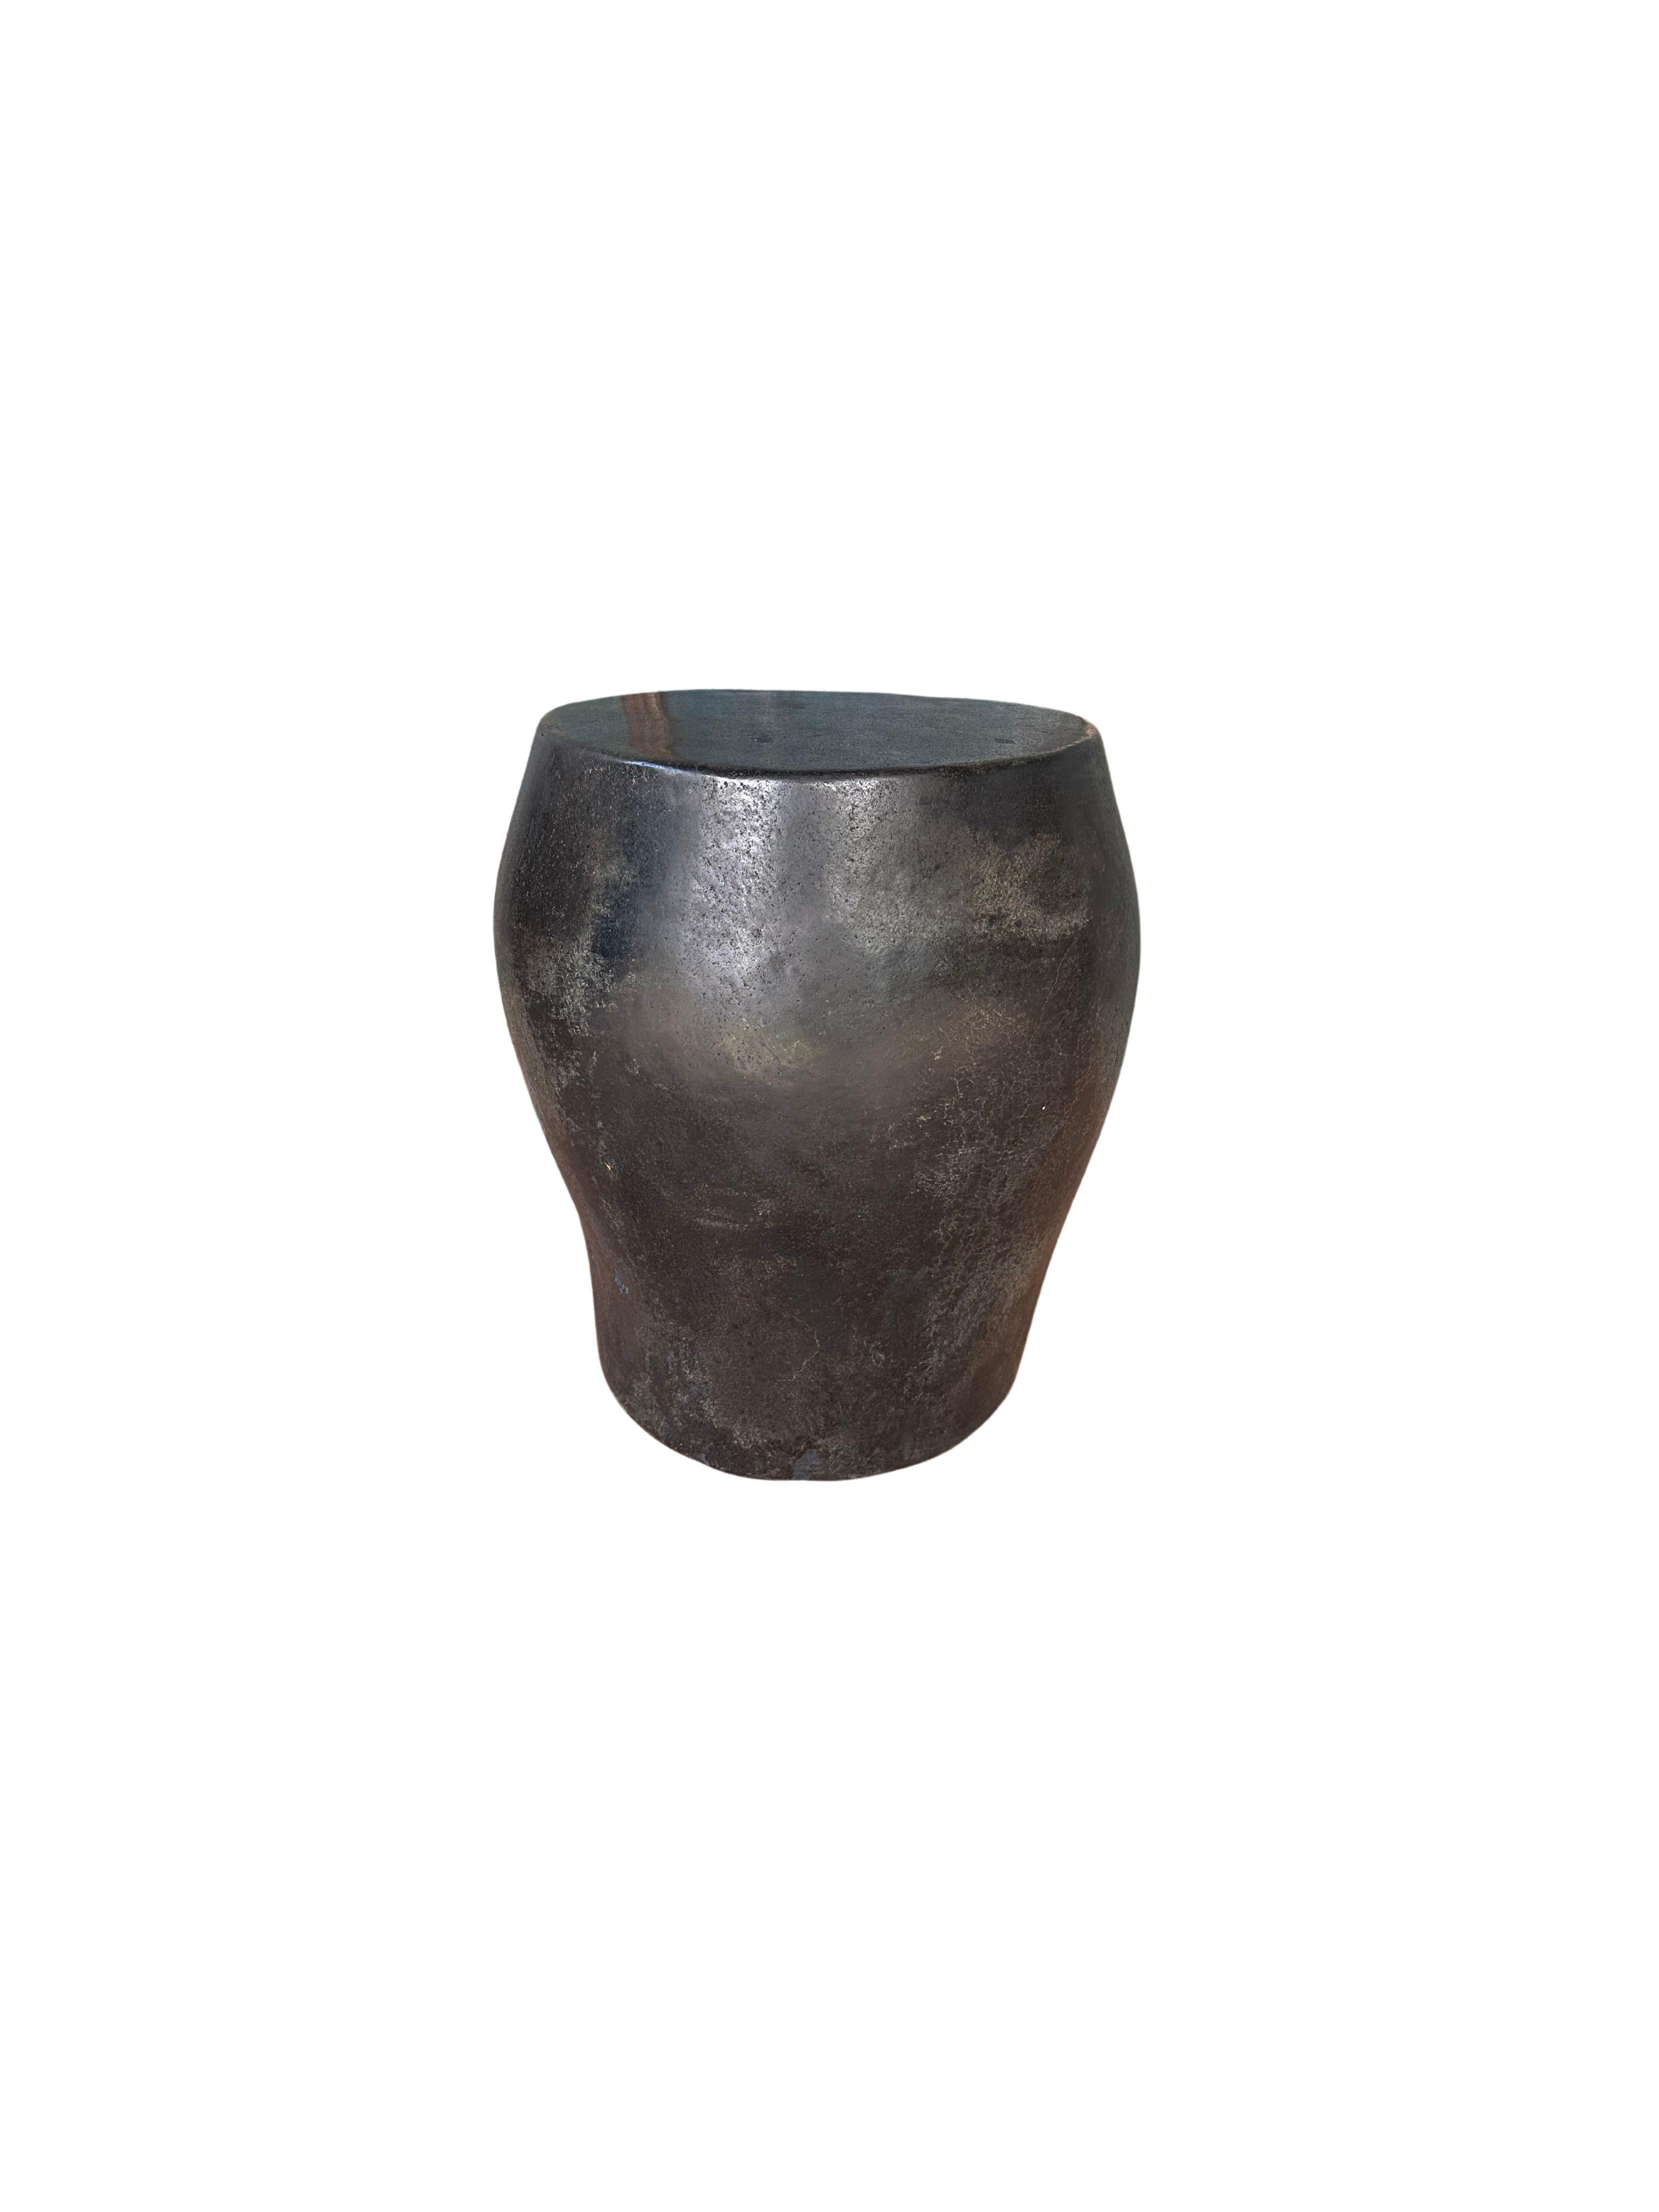 A incredibly heavy and solid rounded stone block. This lovely sculptural object was crafted from a solid stone slab. A raw and organic object with beautiful textures. Sourced from a river bed in East Java, it was carefully shaped and polished into